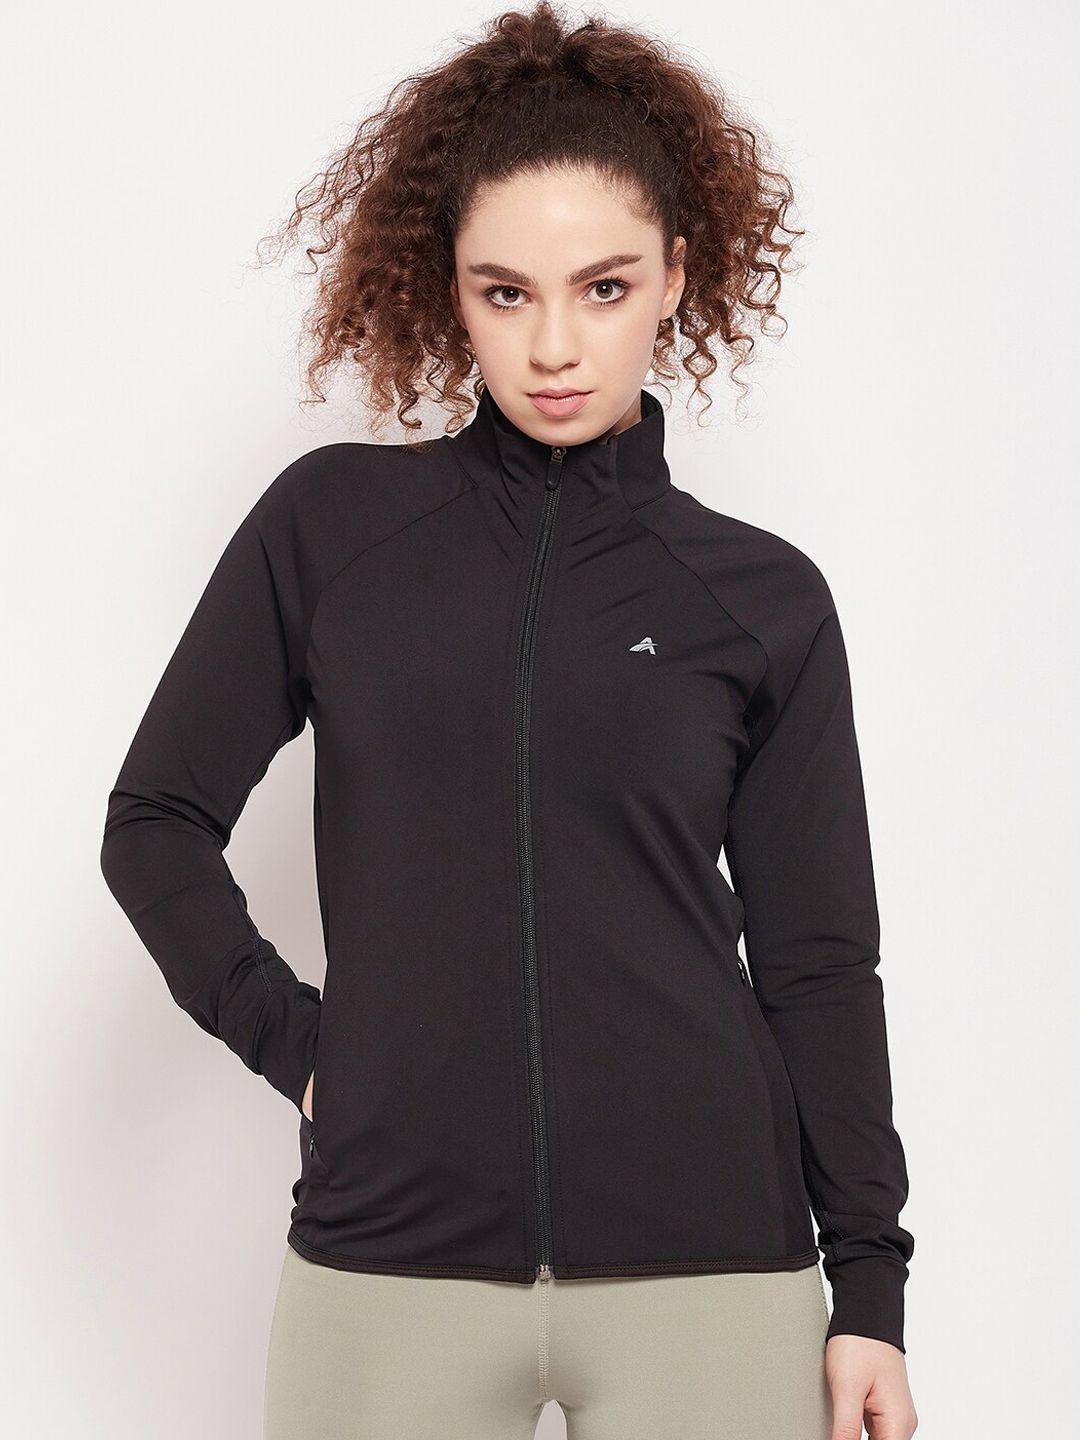 athlisis-reflective-strip-mock-collar-long-sleeves-dry-fit-training-or-gym-sporty-jacket